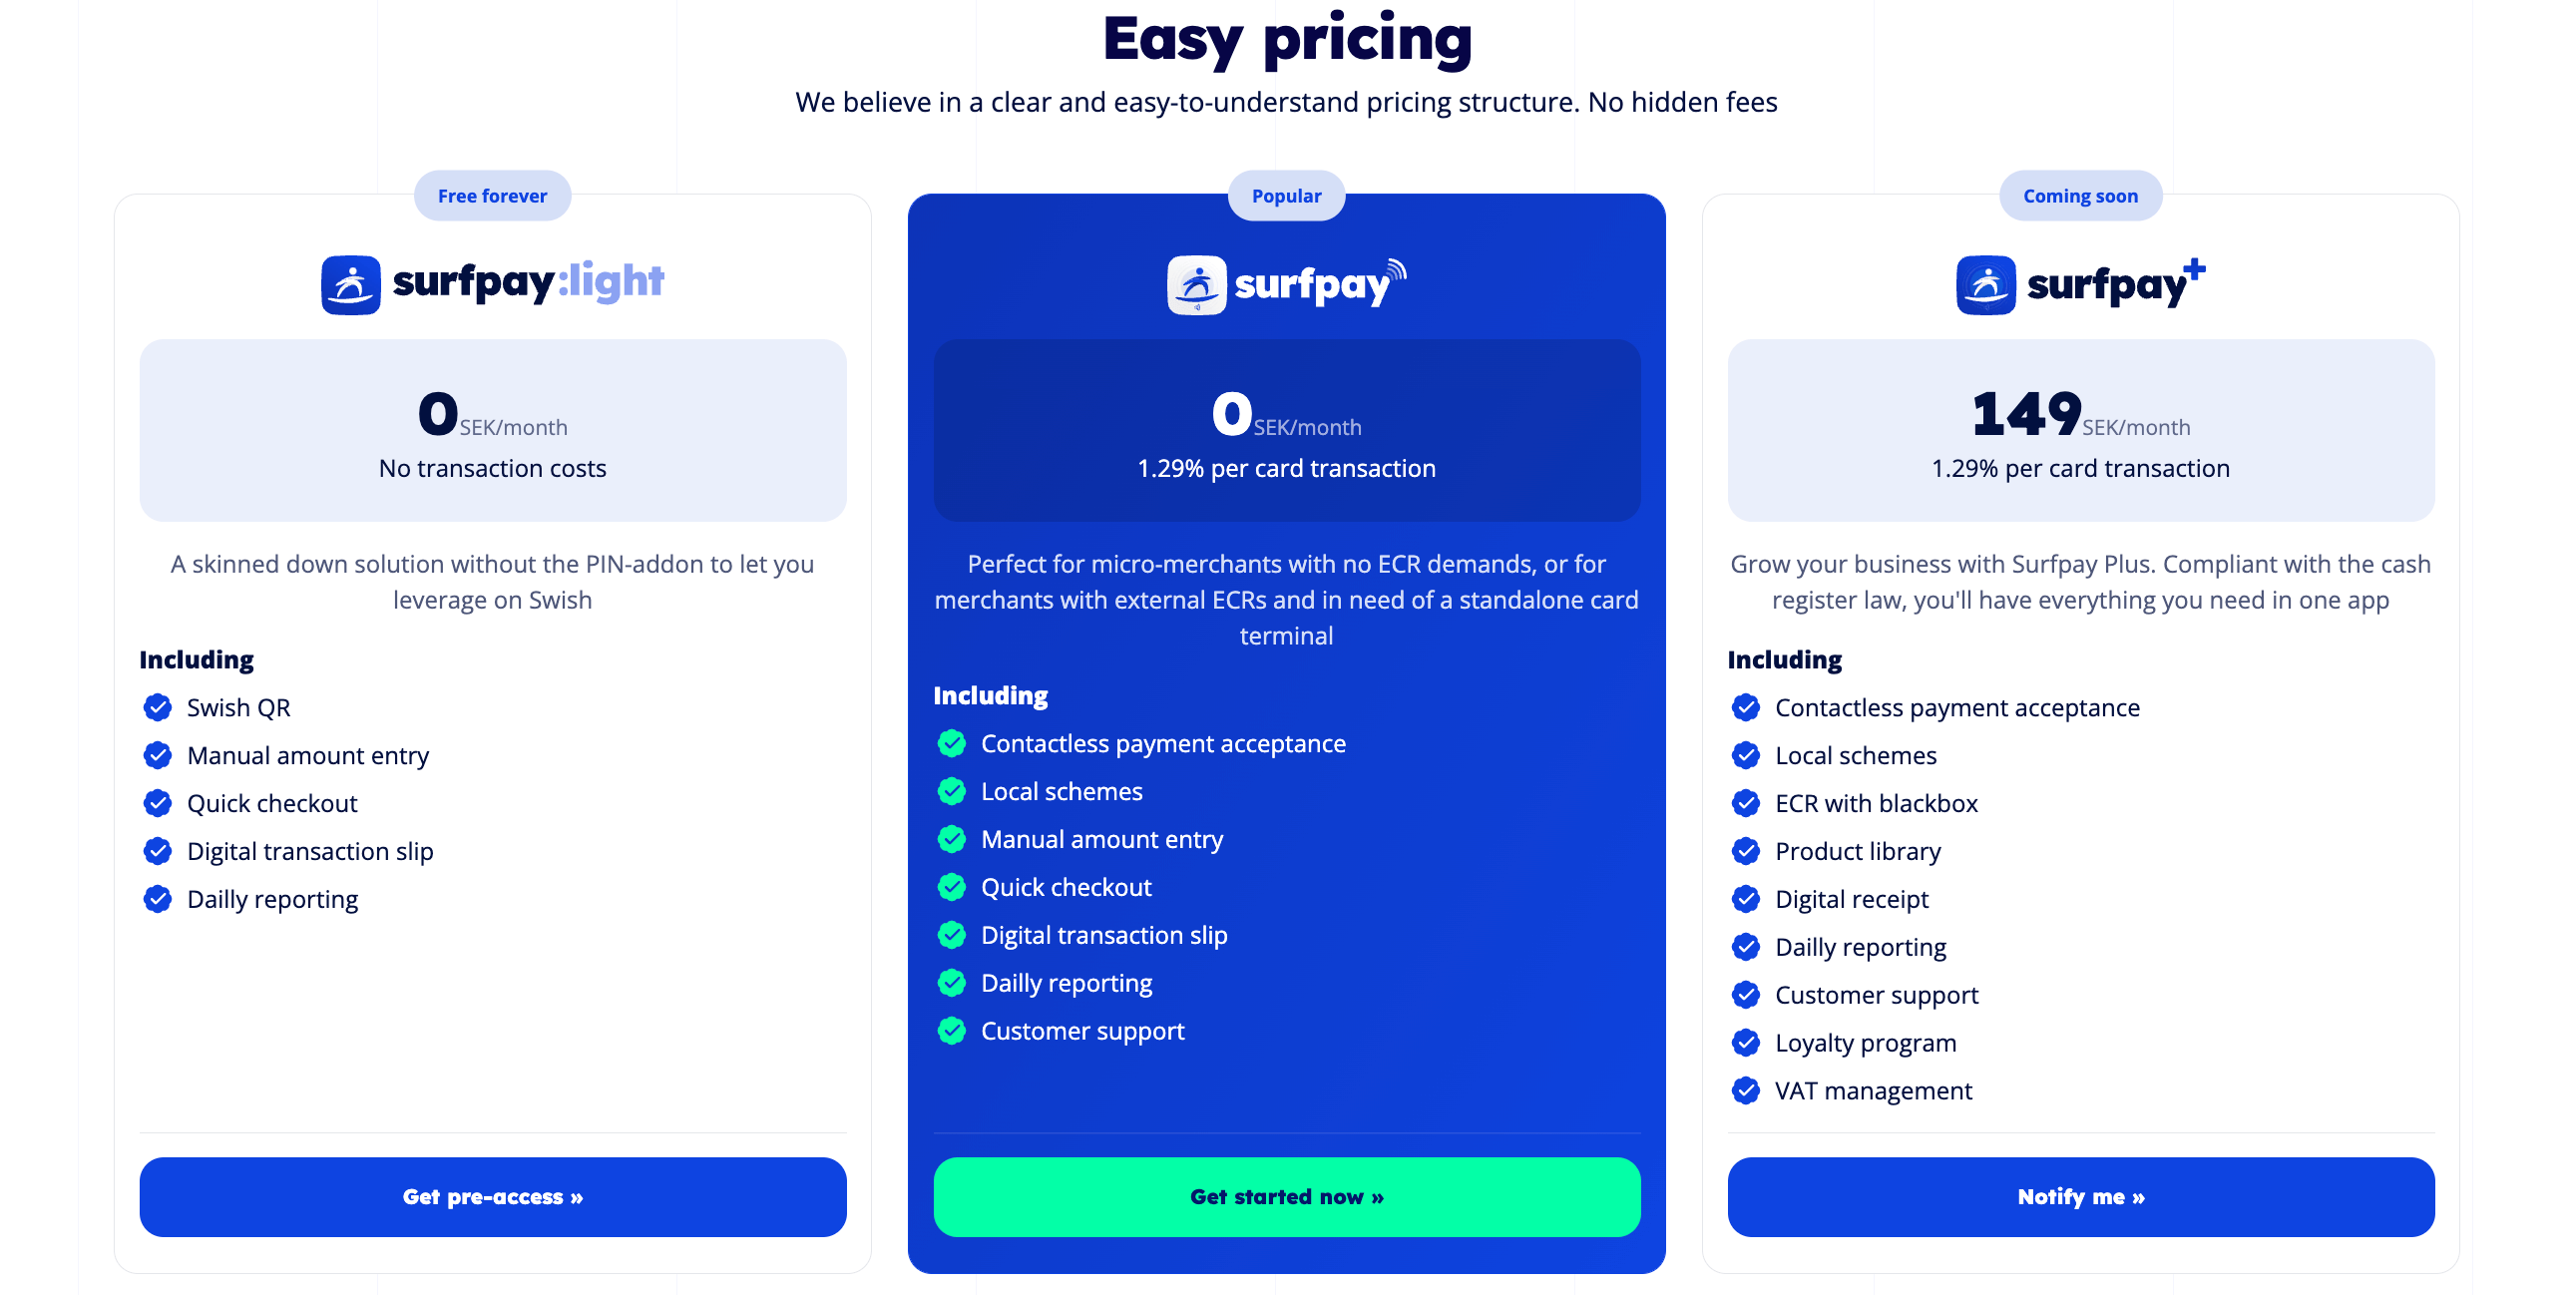 Check out our pricing page to calculate your savings